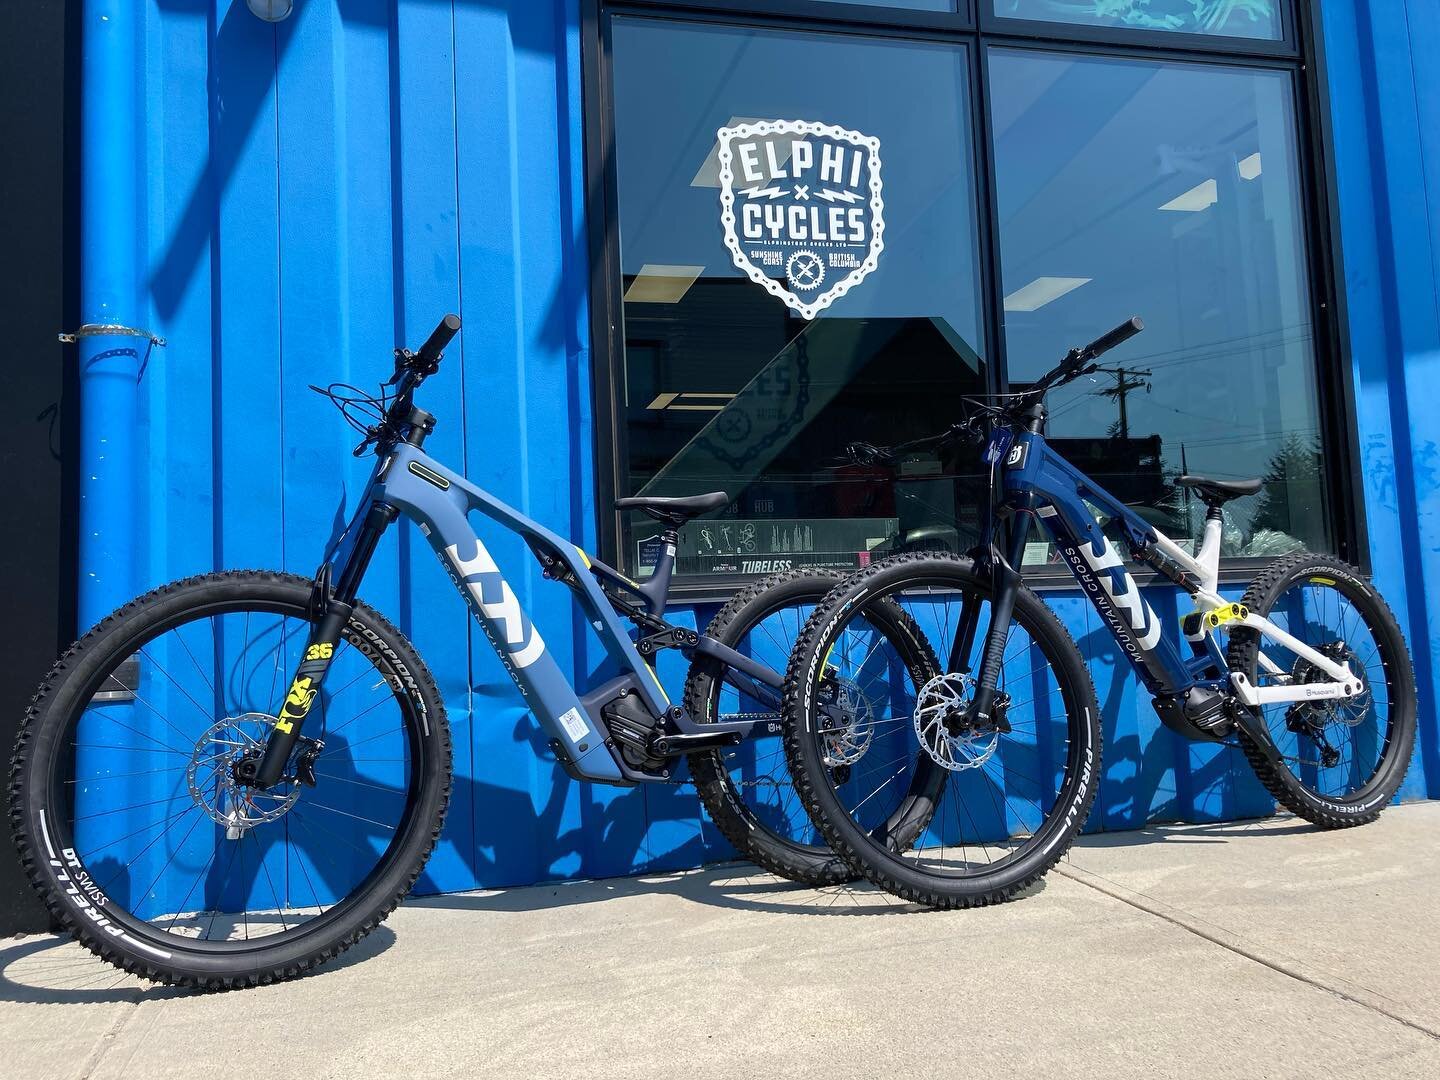 @husqvarna.bicycles MC2 $6249.00 and an MC5 $9749.00! Lots of new e-bikes in stock and on the way!